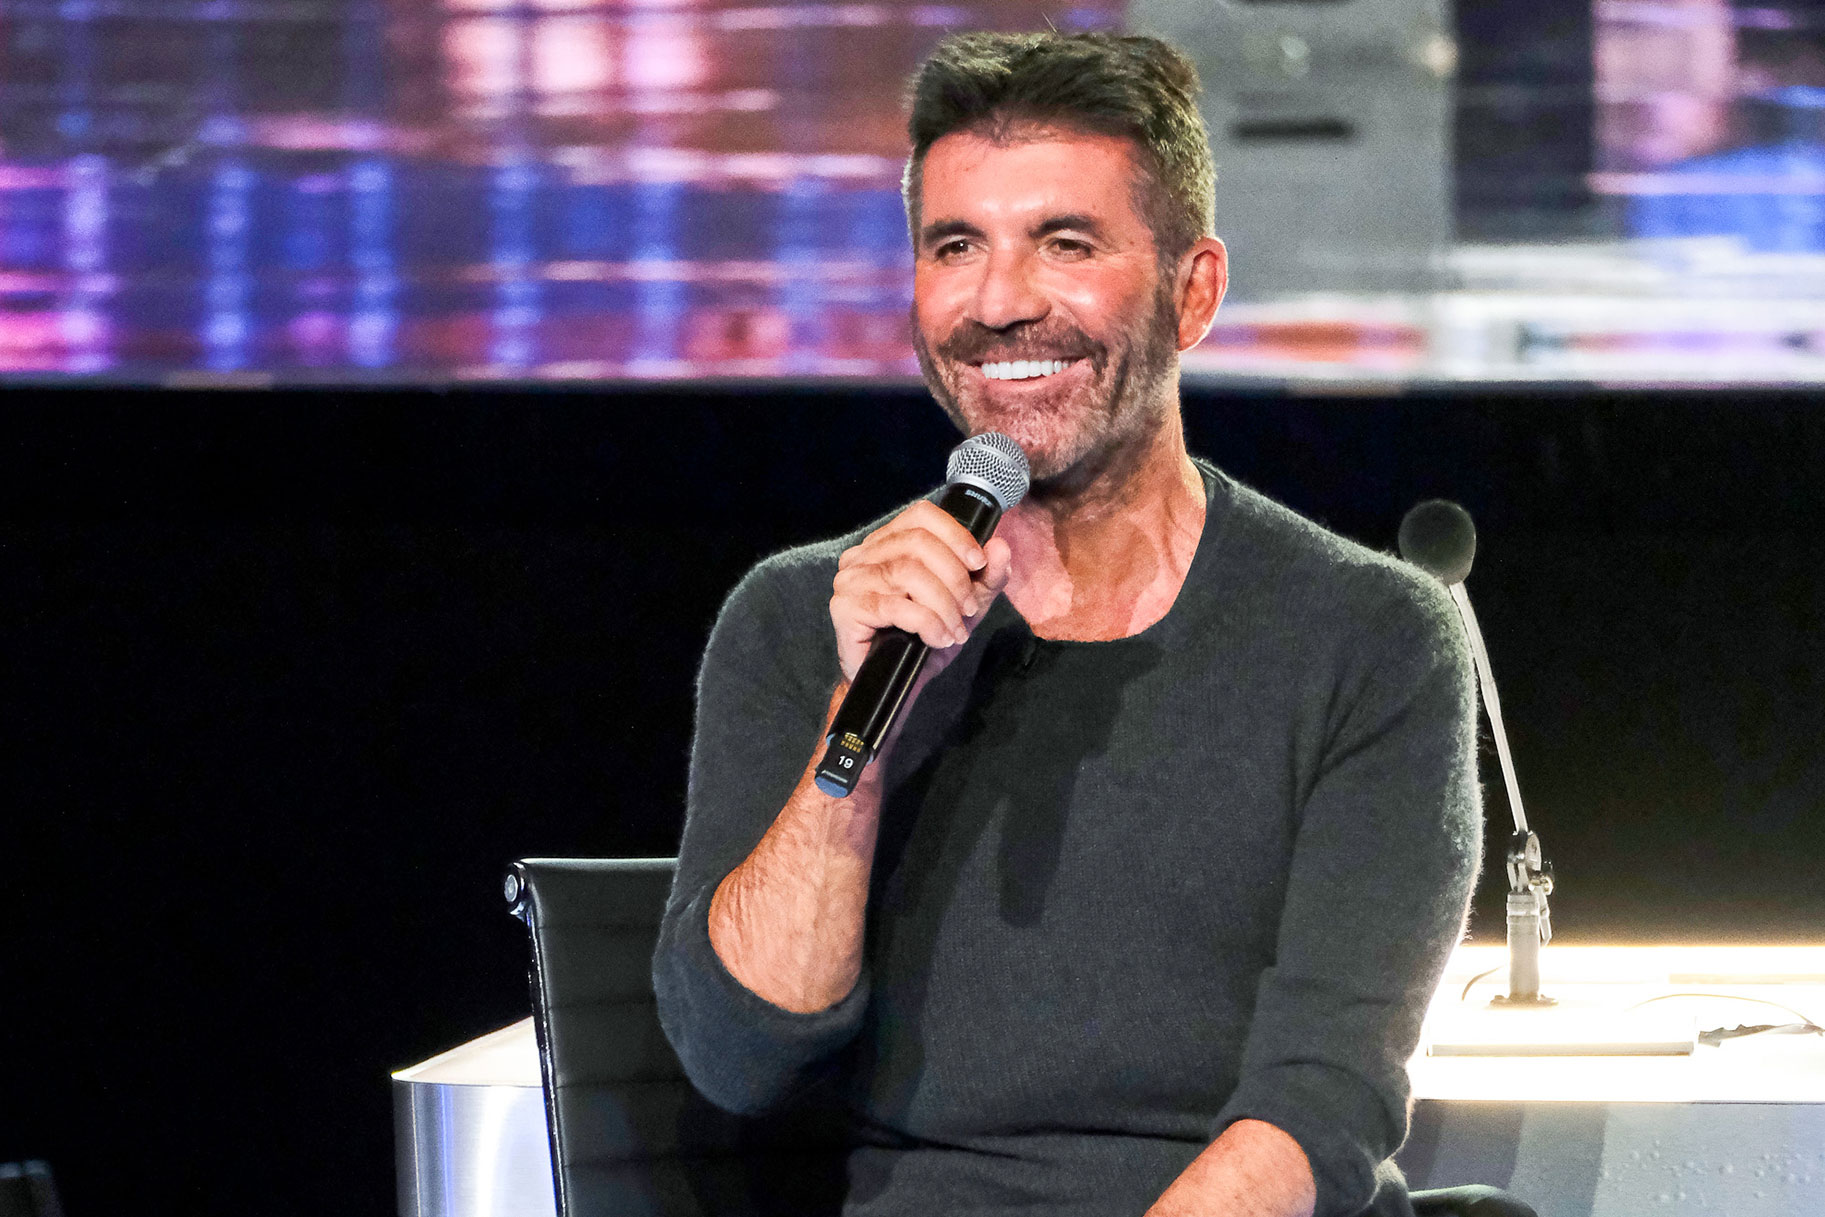 Simon Cowell smiling while holding a mic up to his lips